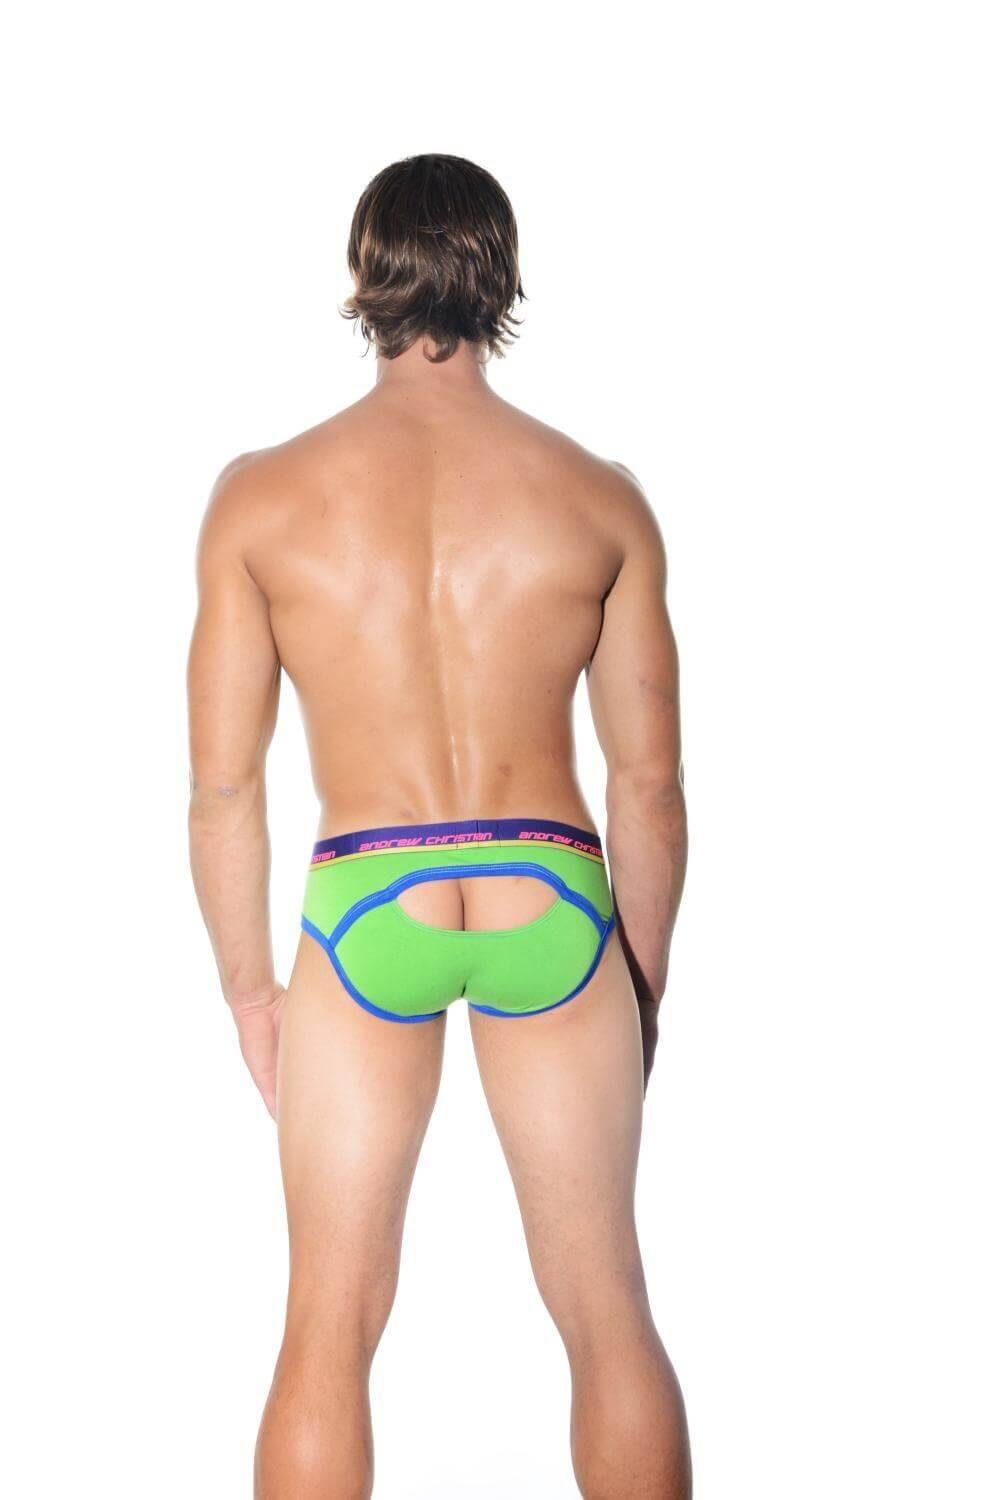 Almost Naked Eclipse Brief w/Show-It, Lime 9495 - Take A Peek